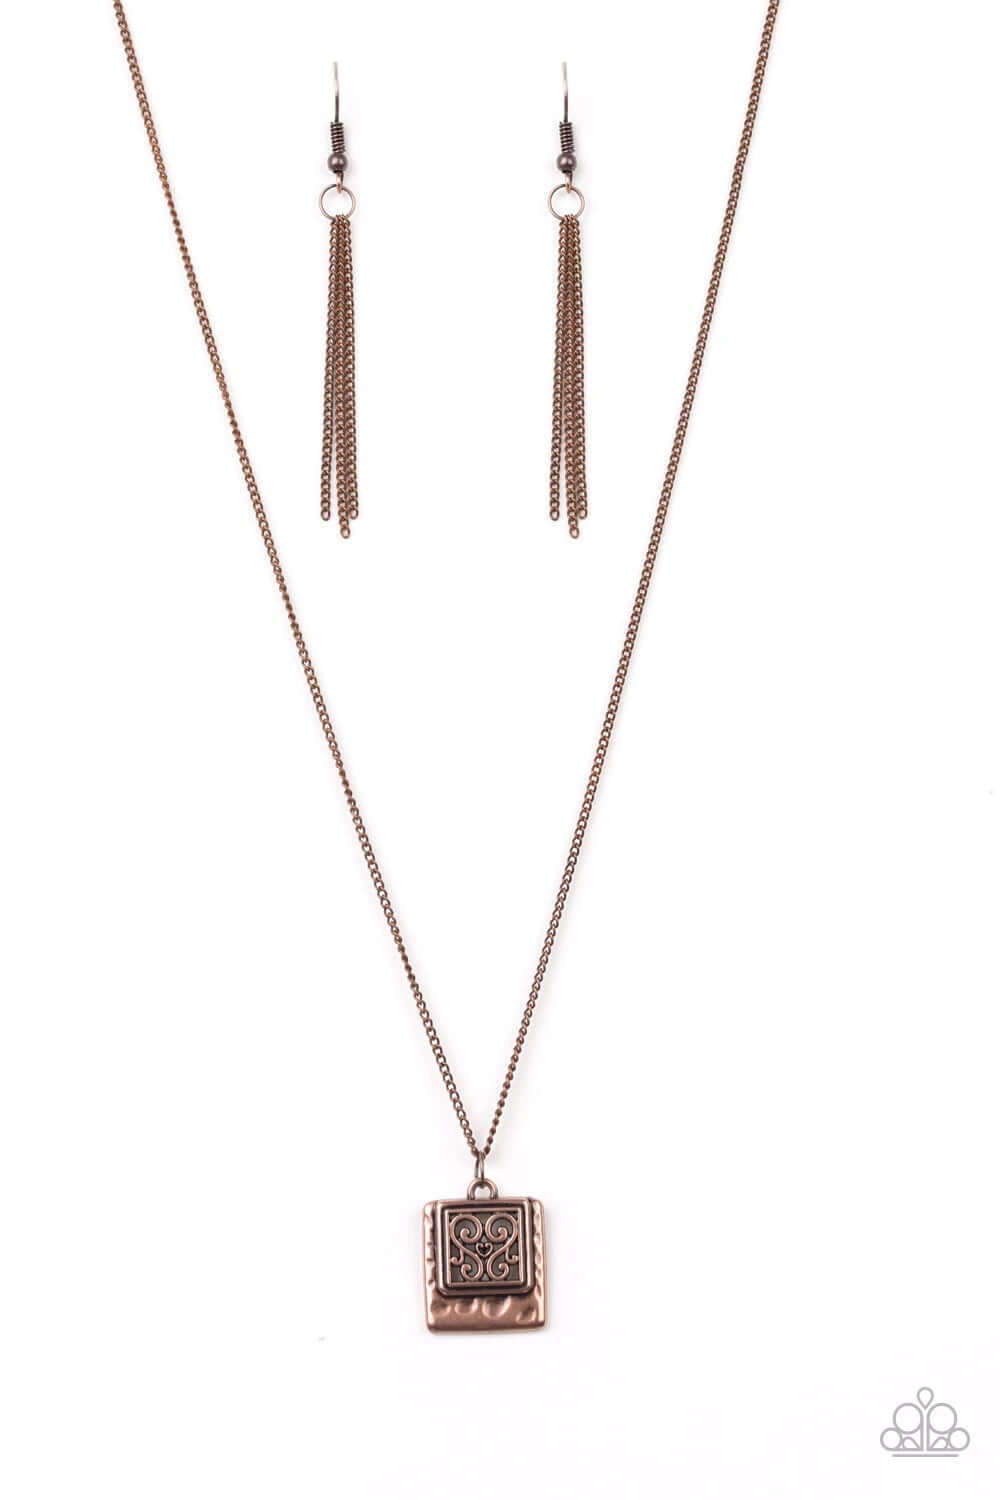 Paparazzi Accessories  - Back To Square One #N477 Peg - Copper Necklace